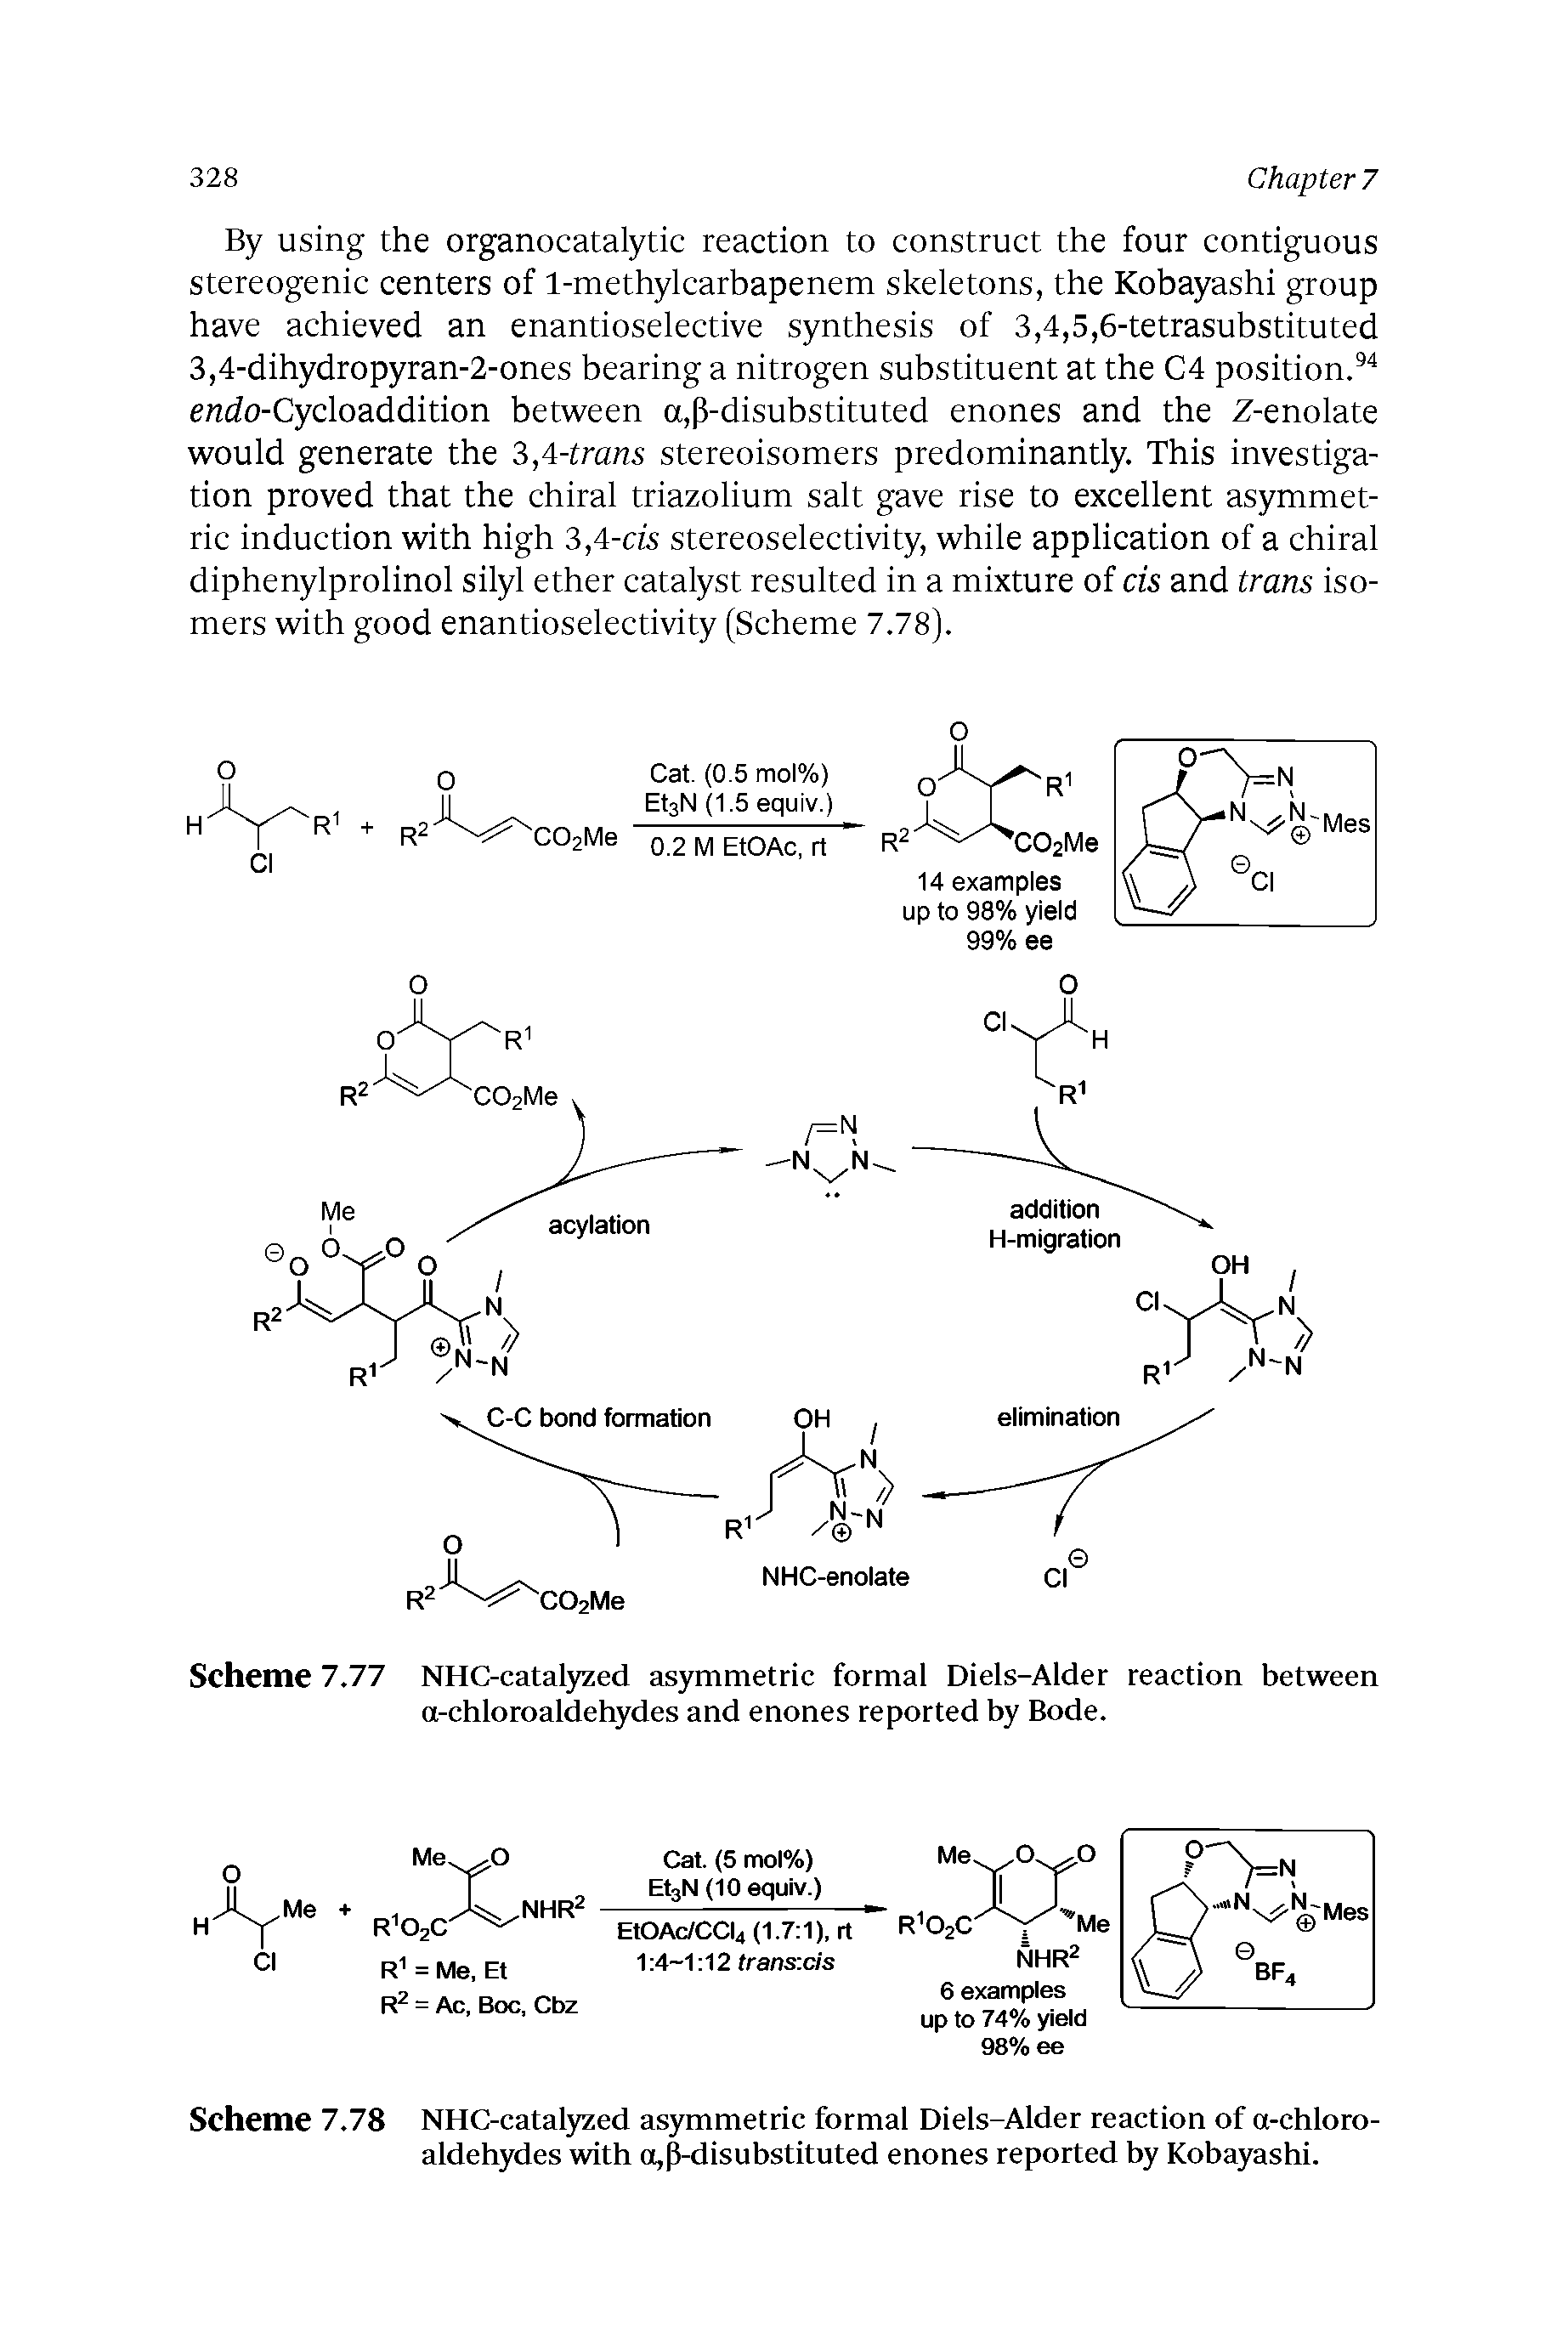 Scheme 7.78 NHC-catalyzed asymmetric formal Diels-Alder reaction of a-chloroaldehydes with a,p-disubstituted enones reported hy Kobayashi.